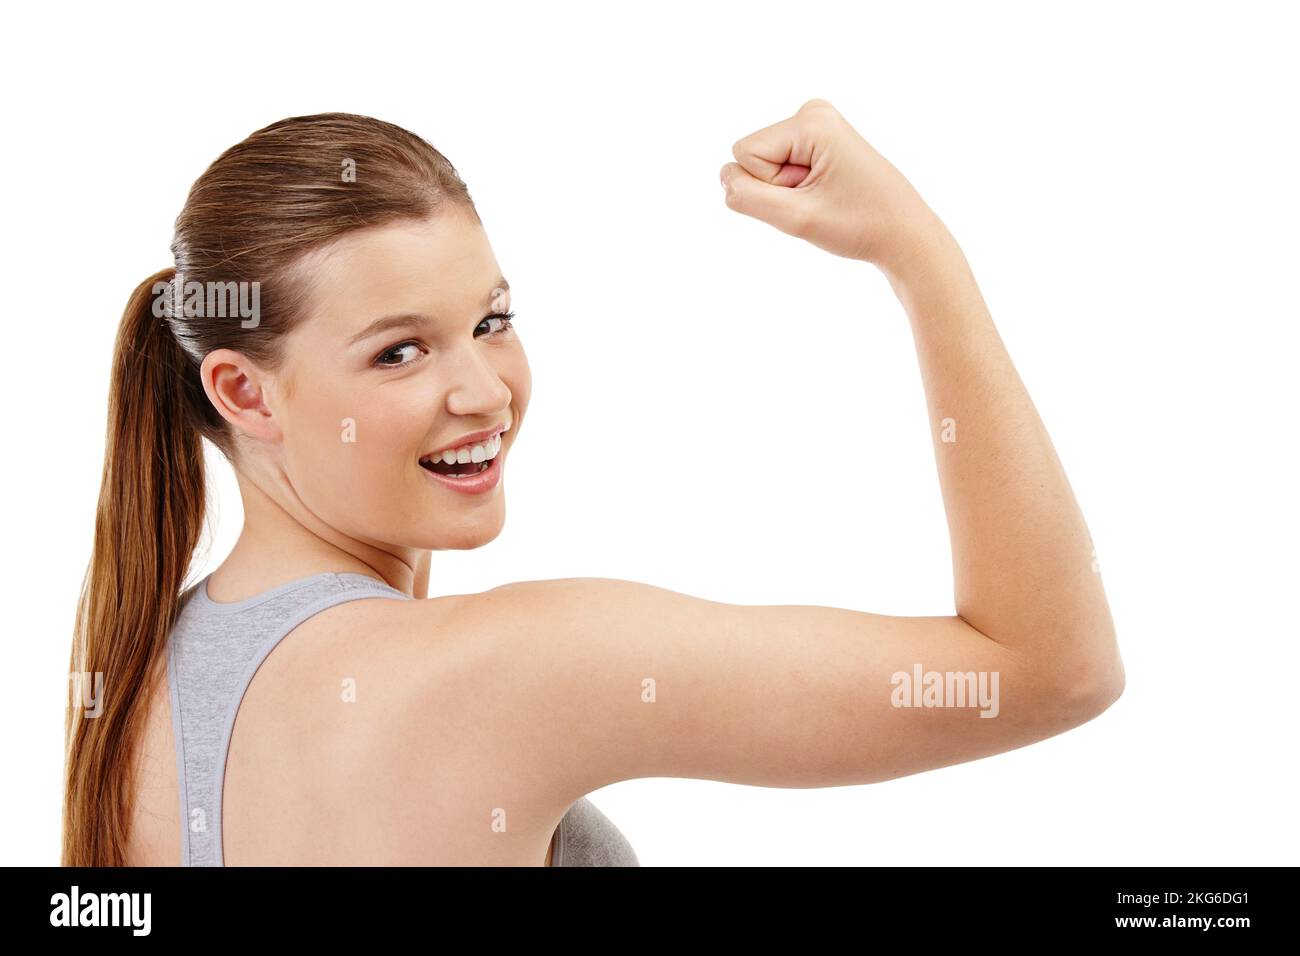 Looking good Dont you think. A teenage girl checking out her bicep muscles after a workout. Stock Photo